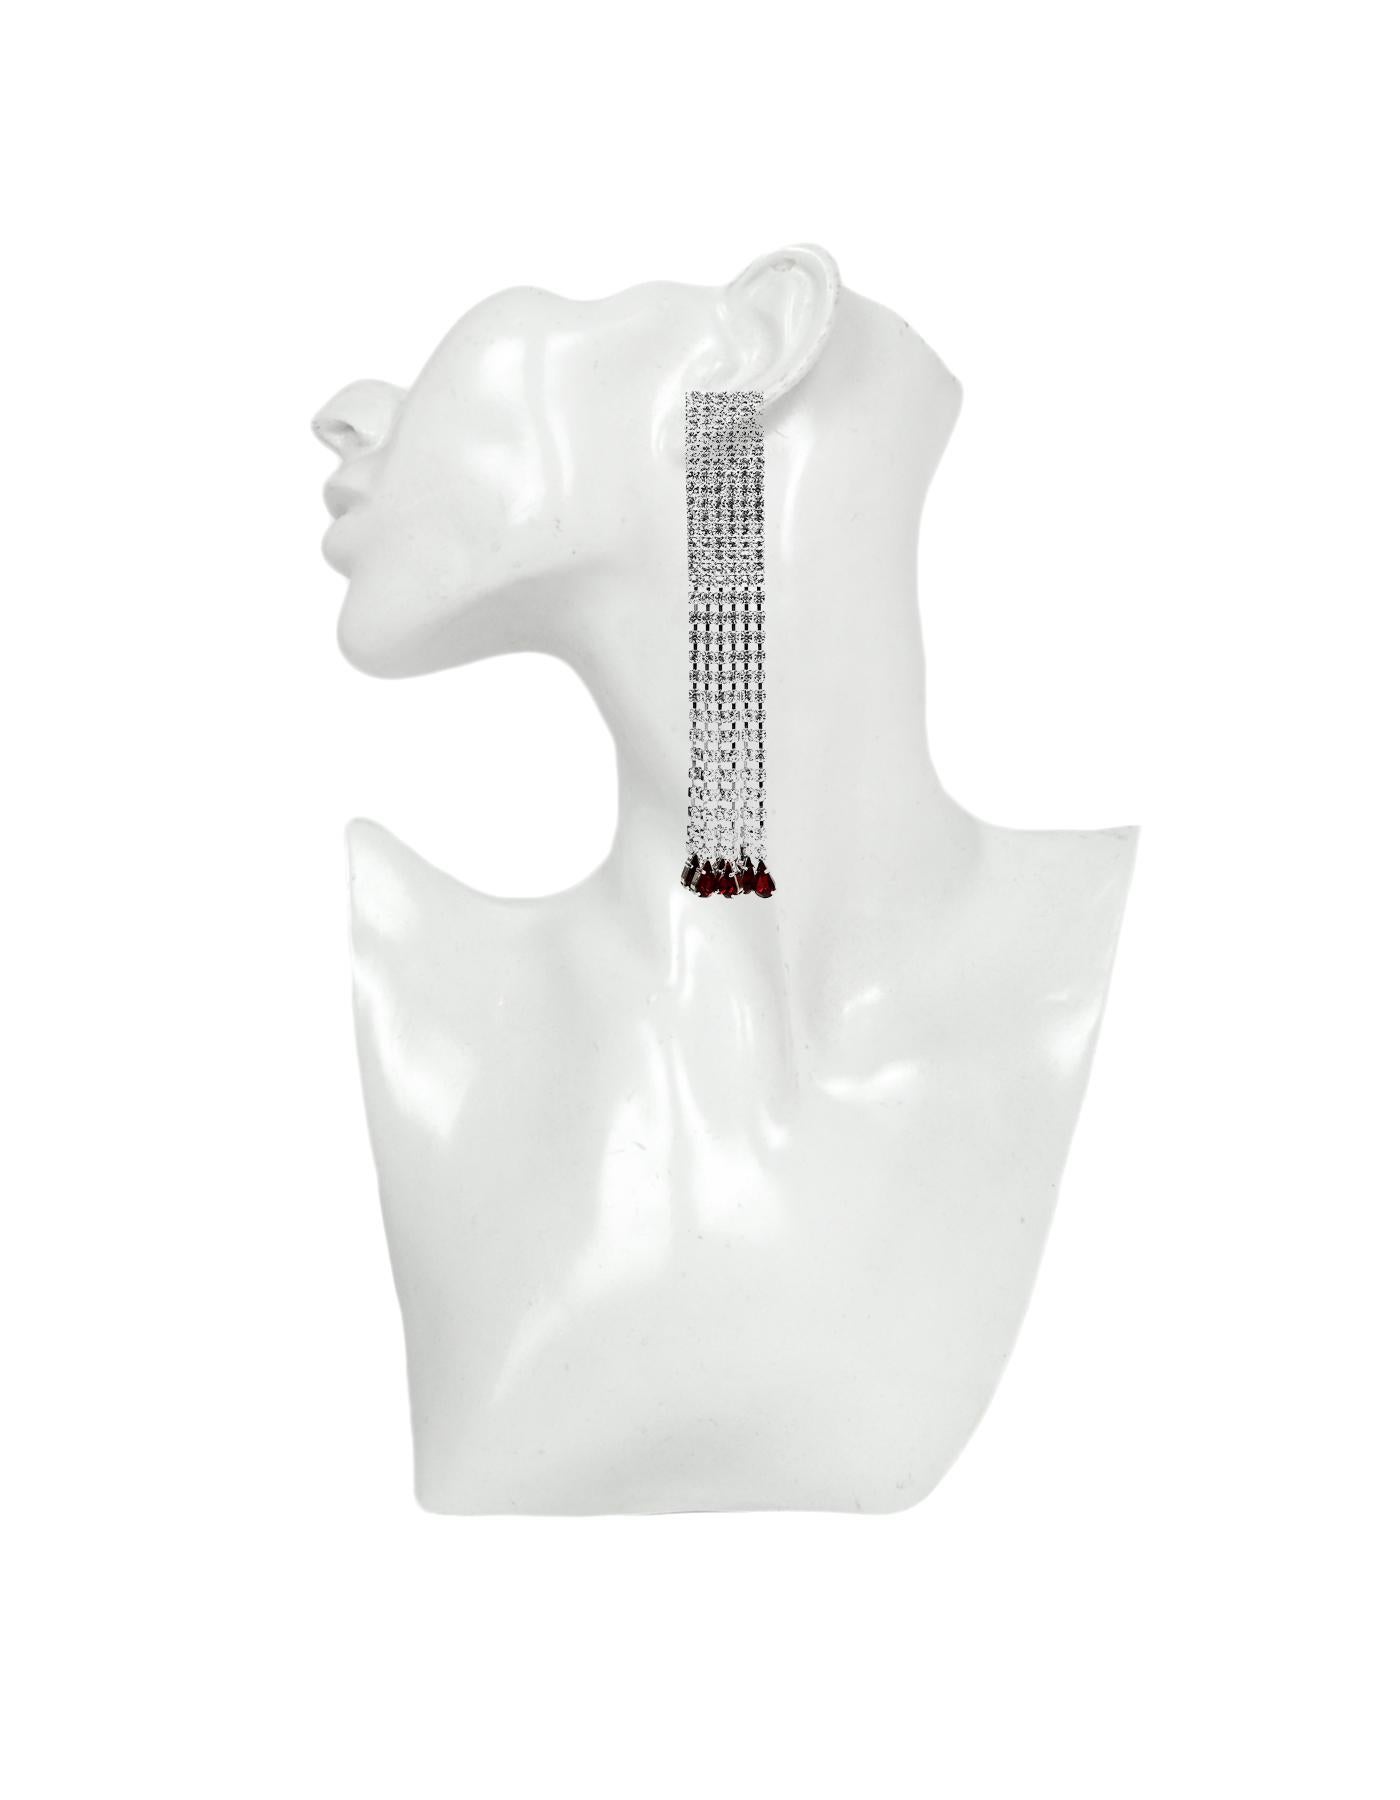 Alessandra Rich Crystal Fringe Clip-on Earrings

Color: Silver
Materials: Metal, Red Crystalline
Hallmarks: 